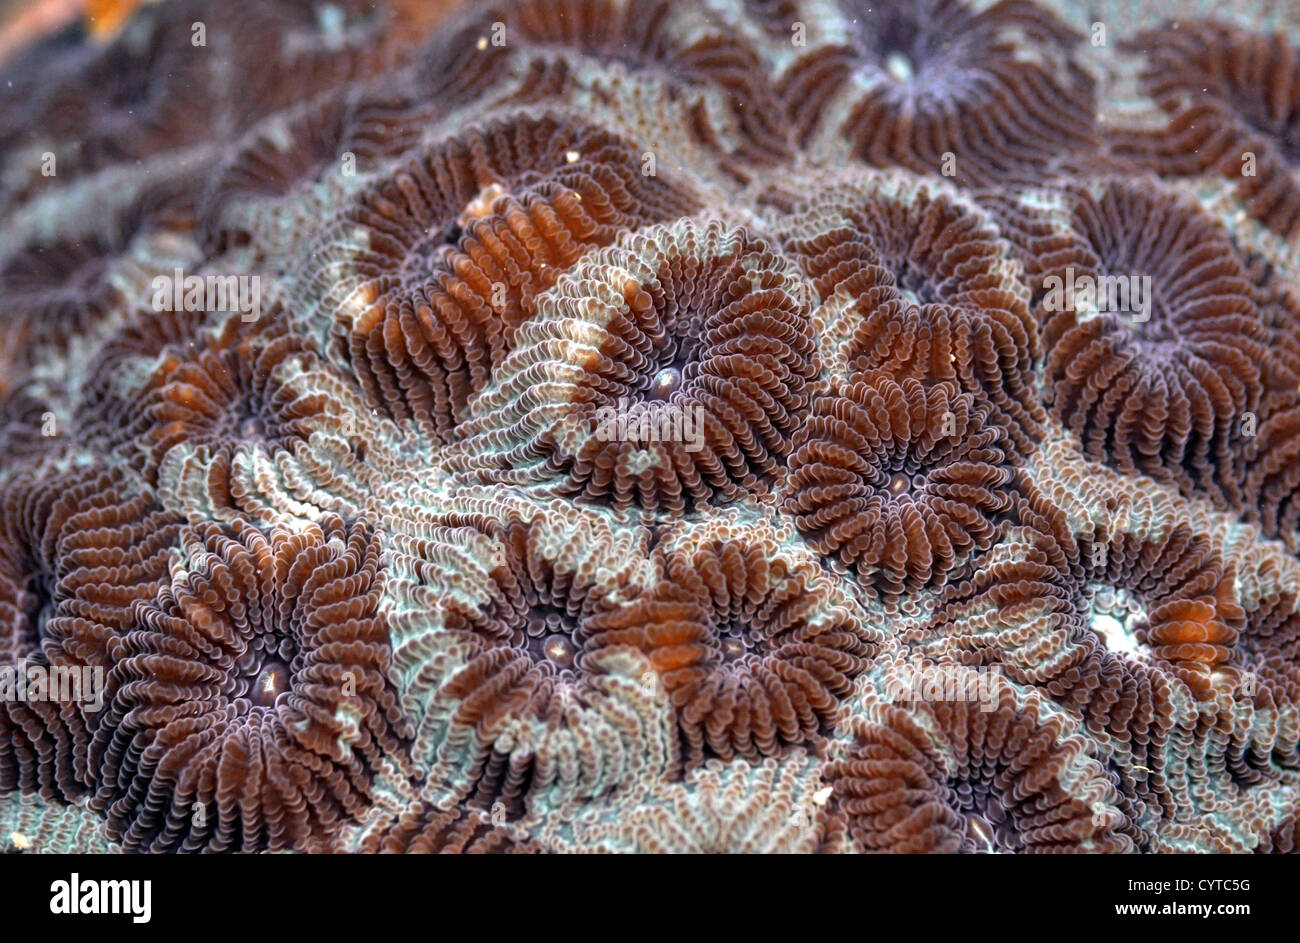 Hard coral, Montastrea sp., Pohnpei, Federated States of Micronesia Stock Photo